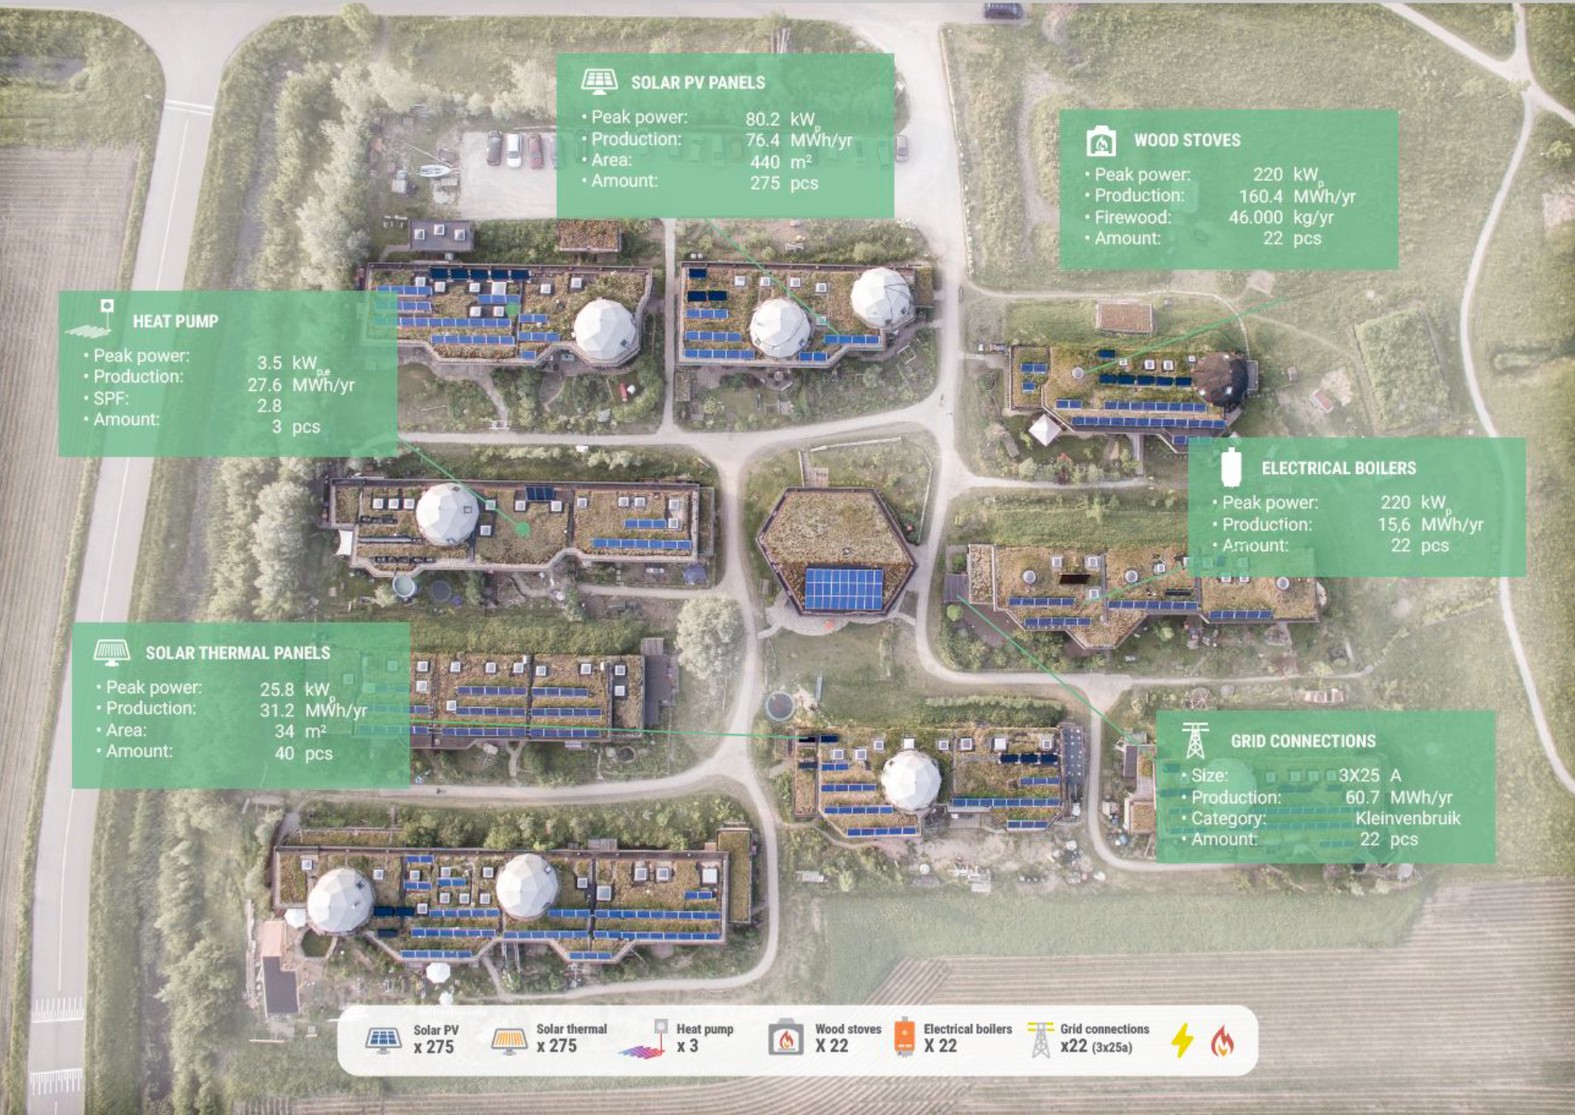 How the Ardehuizen ecovillage would work as a microgrid. Image: Metabolic